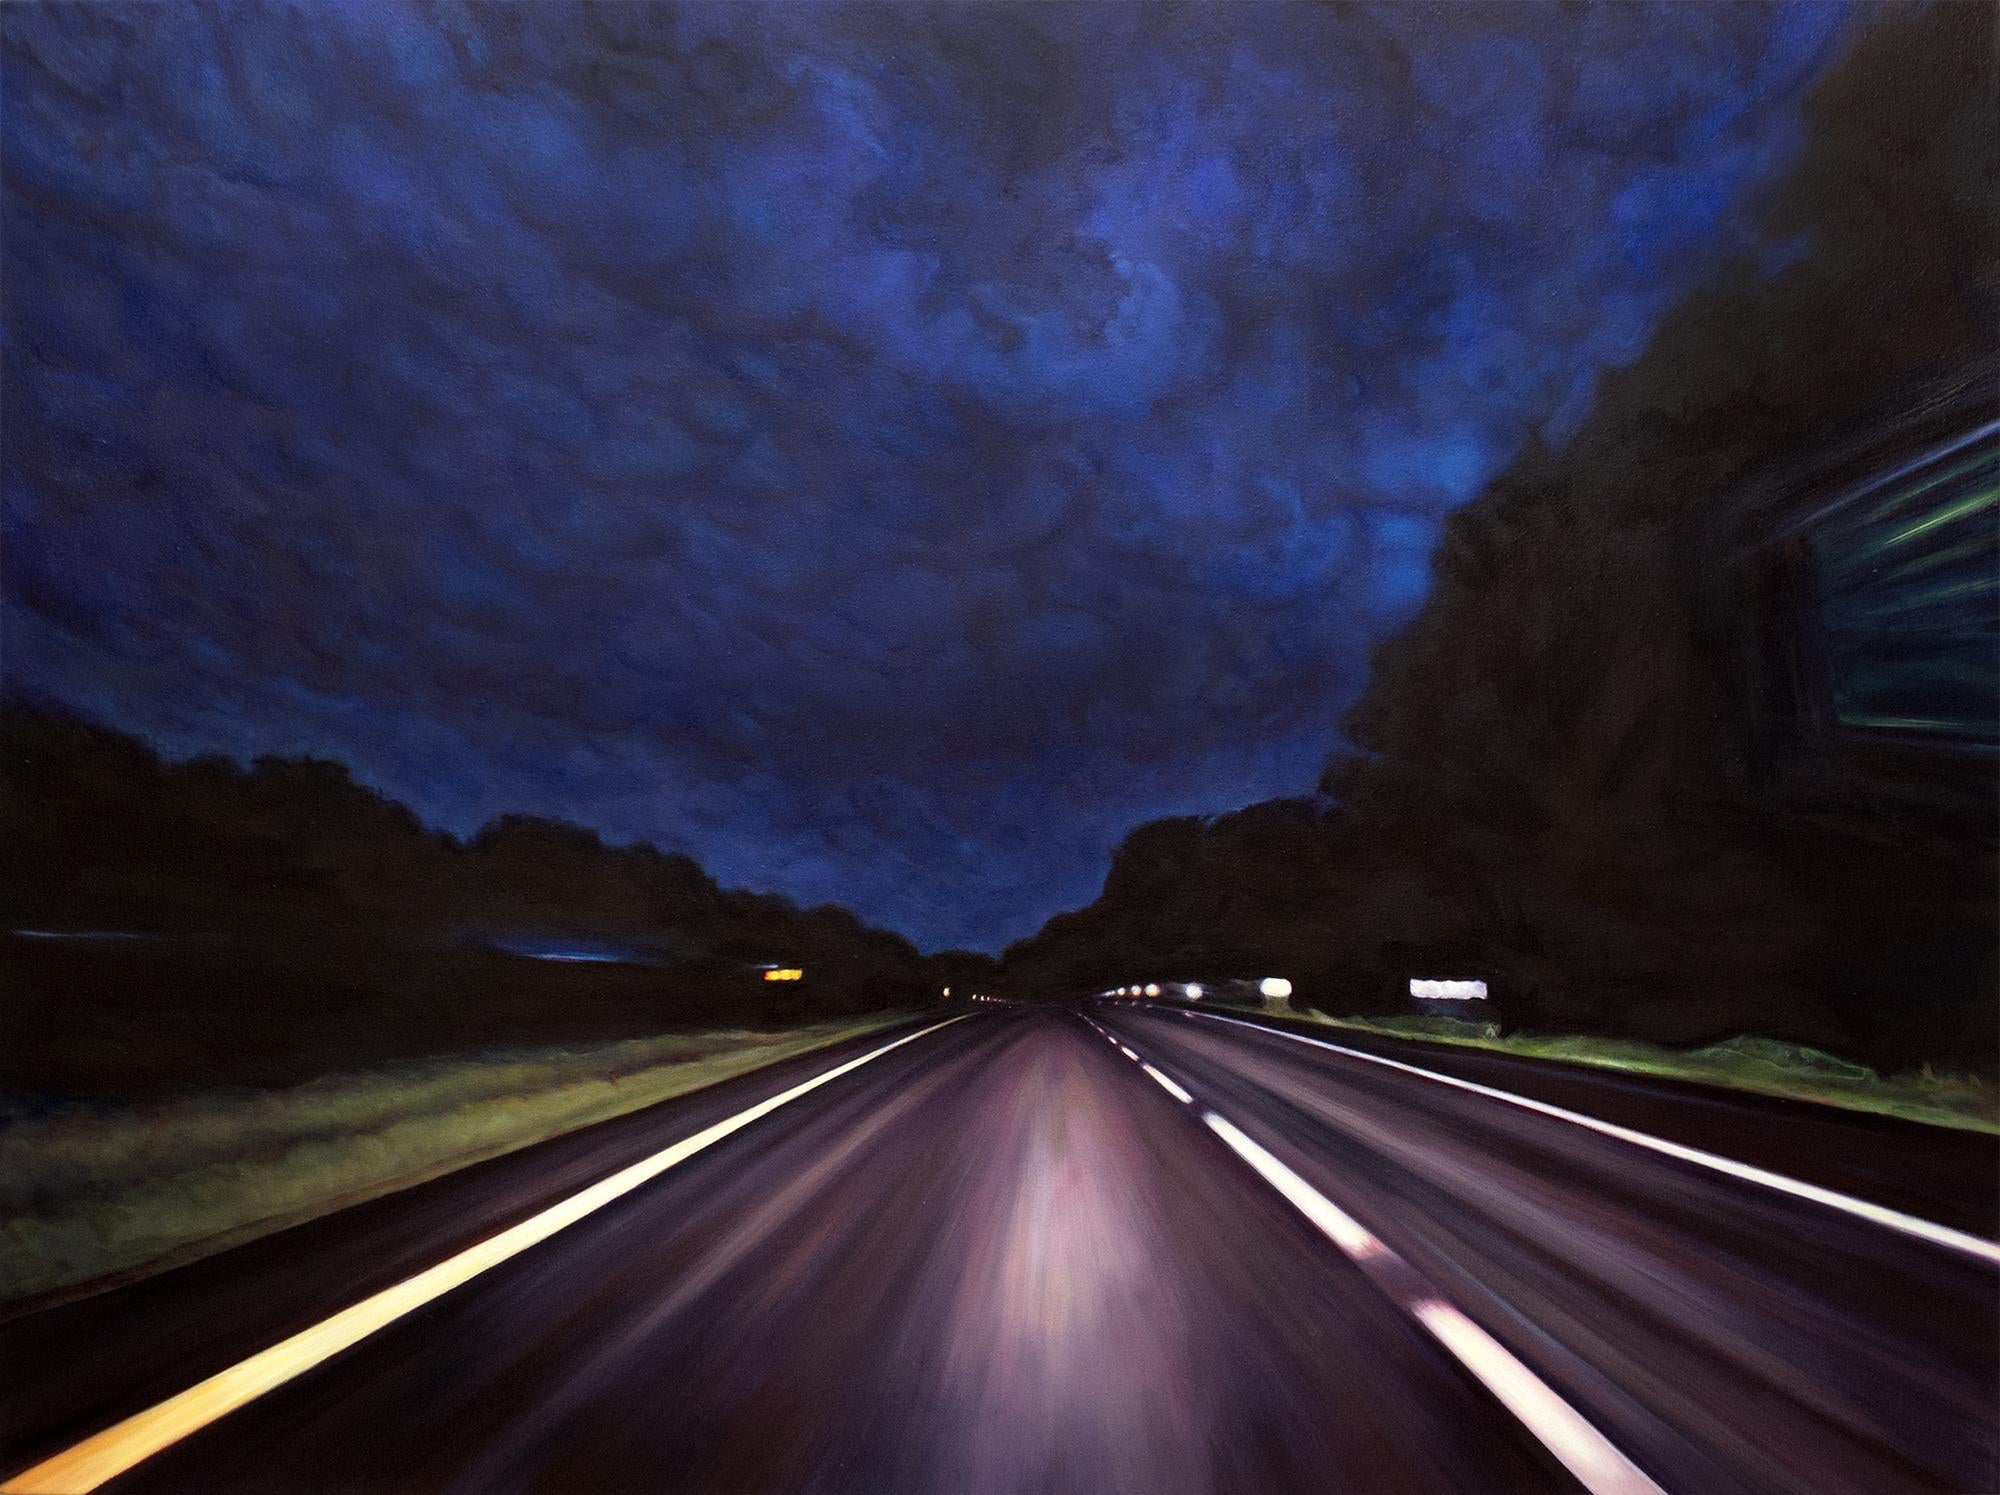 Edie Nadelhaft Landscape Painting - May 27 (8.59pm) - Road landscape painting